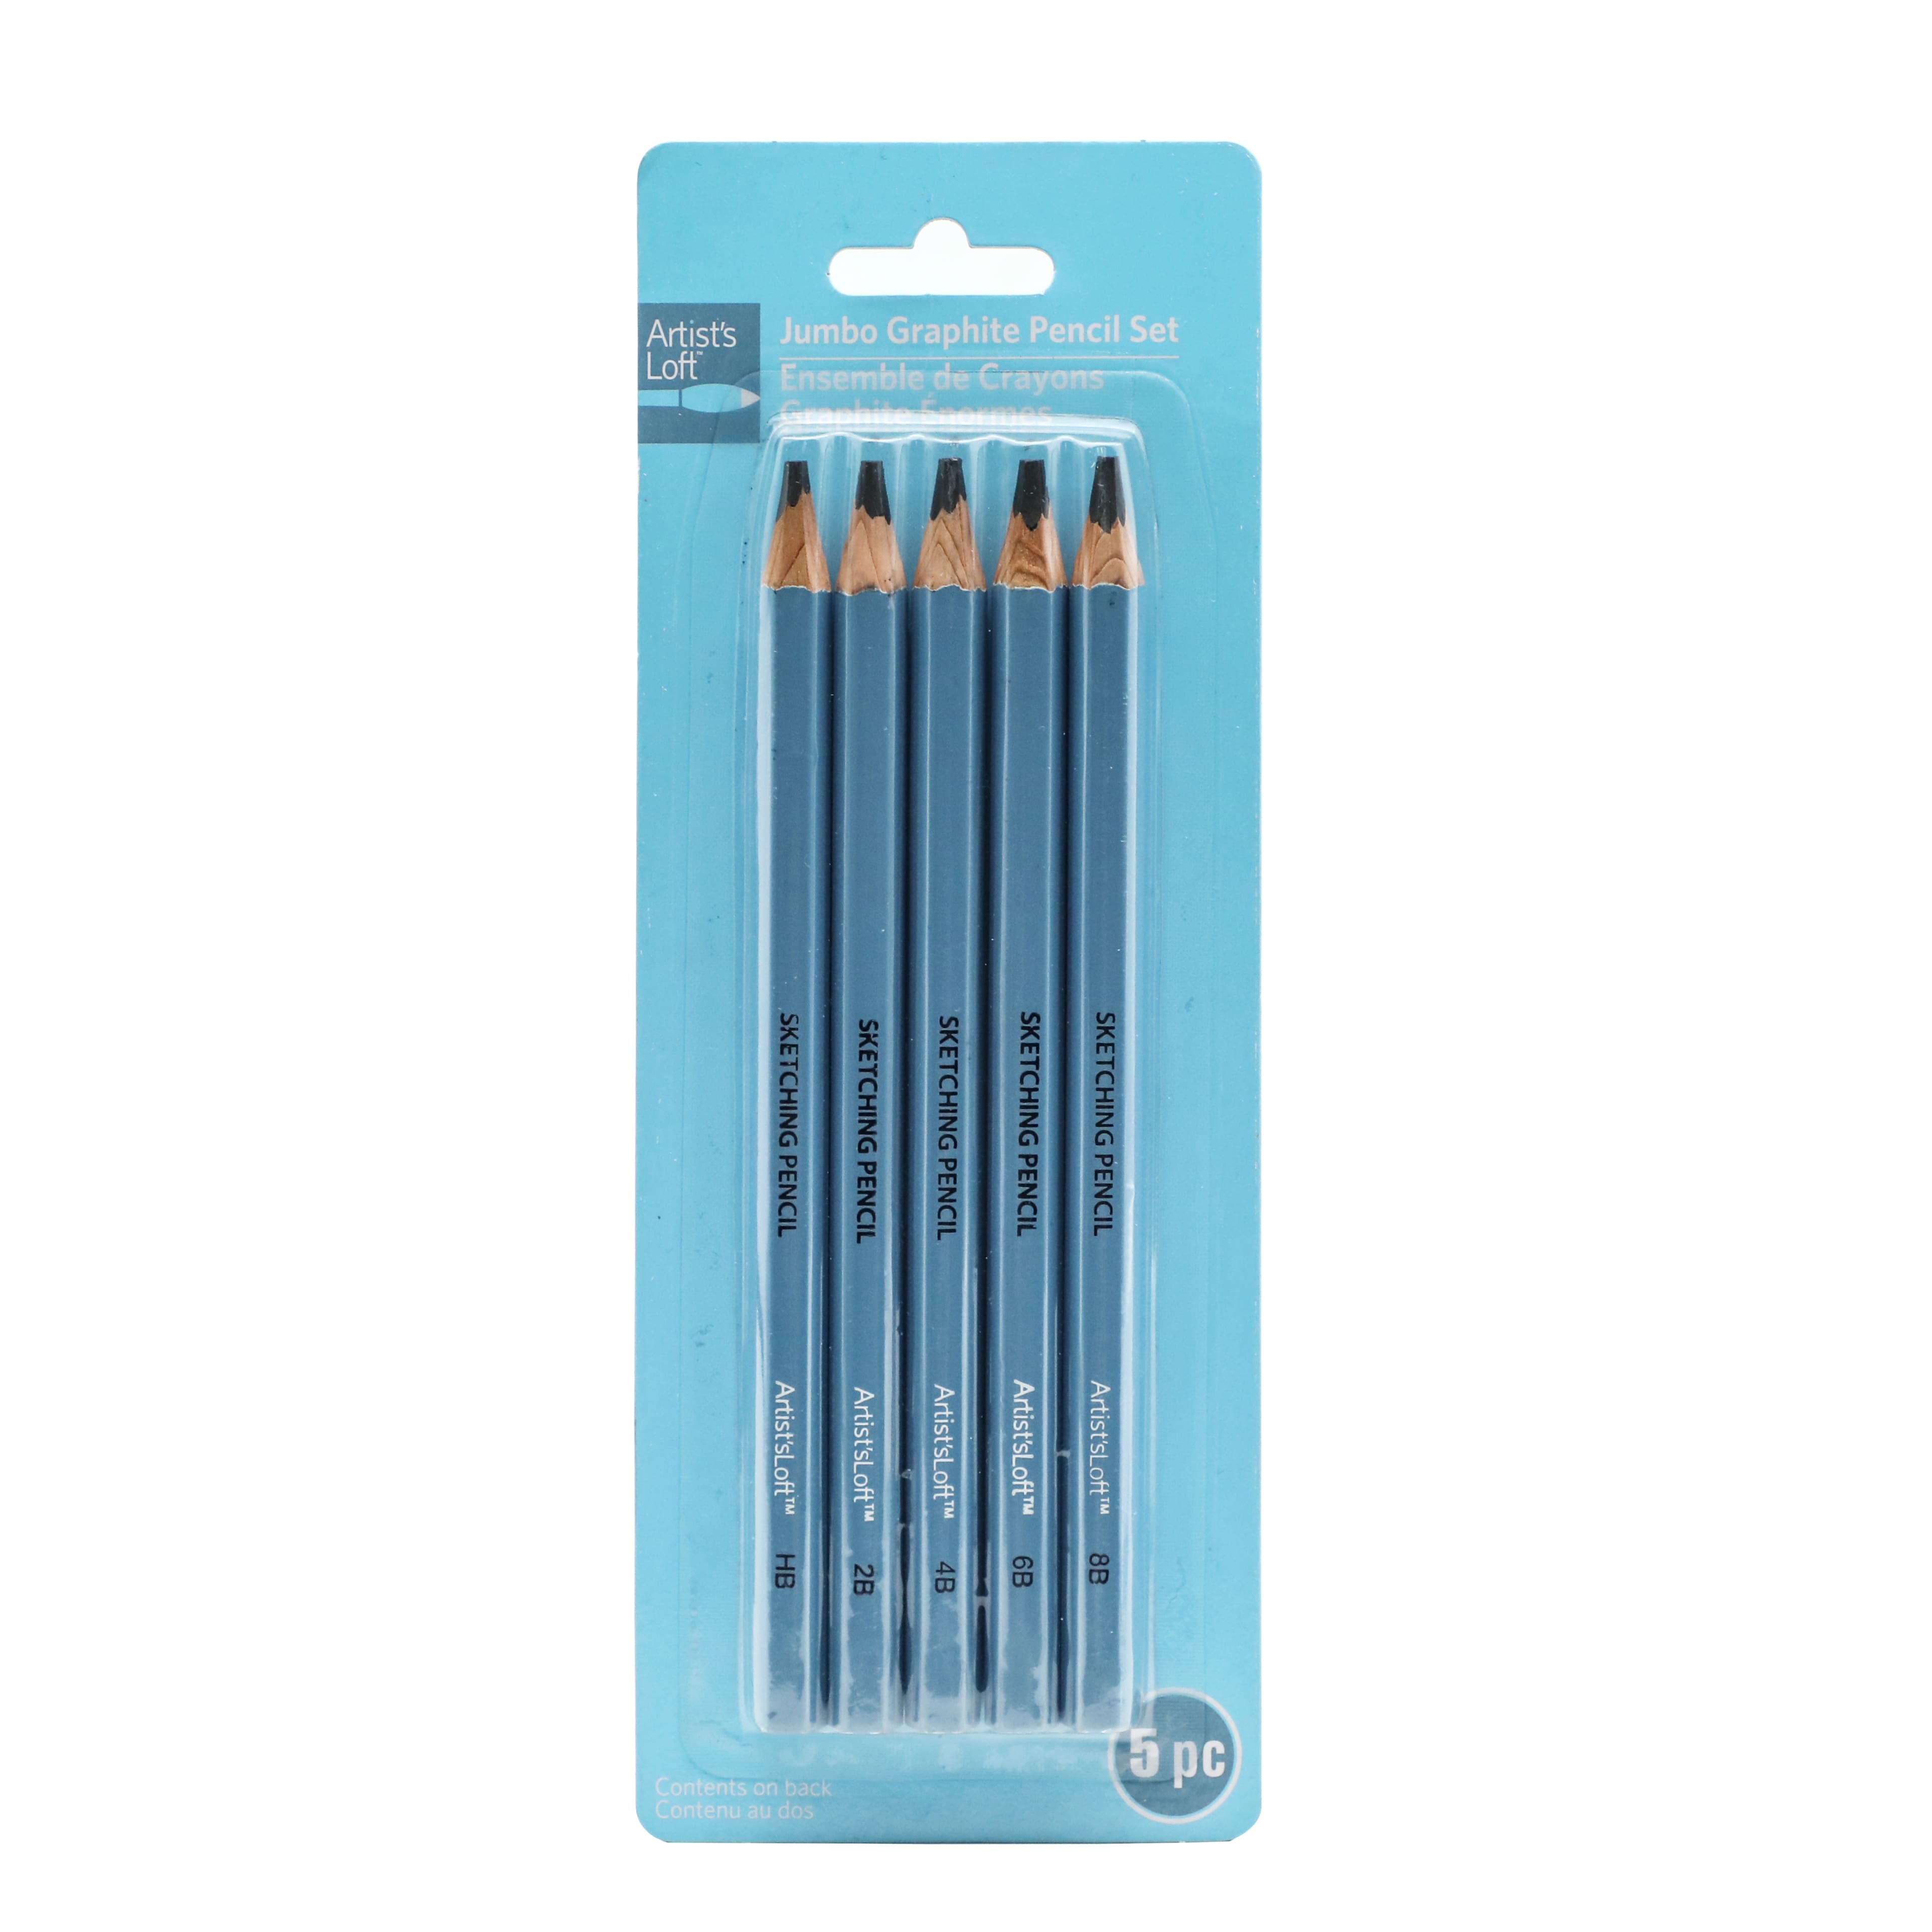 Sketch Pencils for Drawing, 12 Pack, Duslogis Drawing Pencils, Art Pencils, Graphite  Pencils, Graphite Pencils for Drawing, Art Pencils for Drawing and Shading, Shading  Pencils for Sketching 